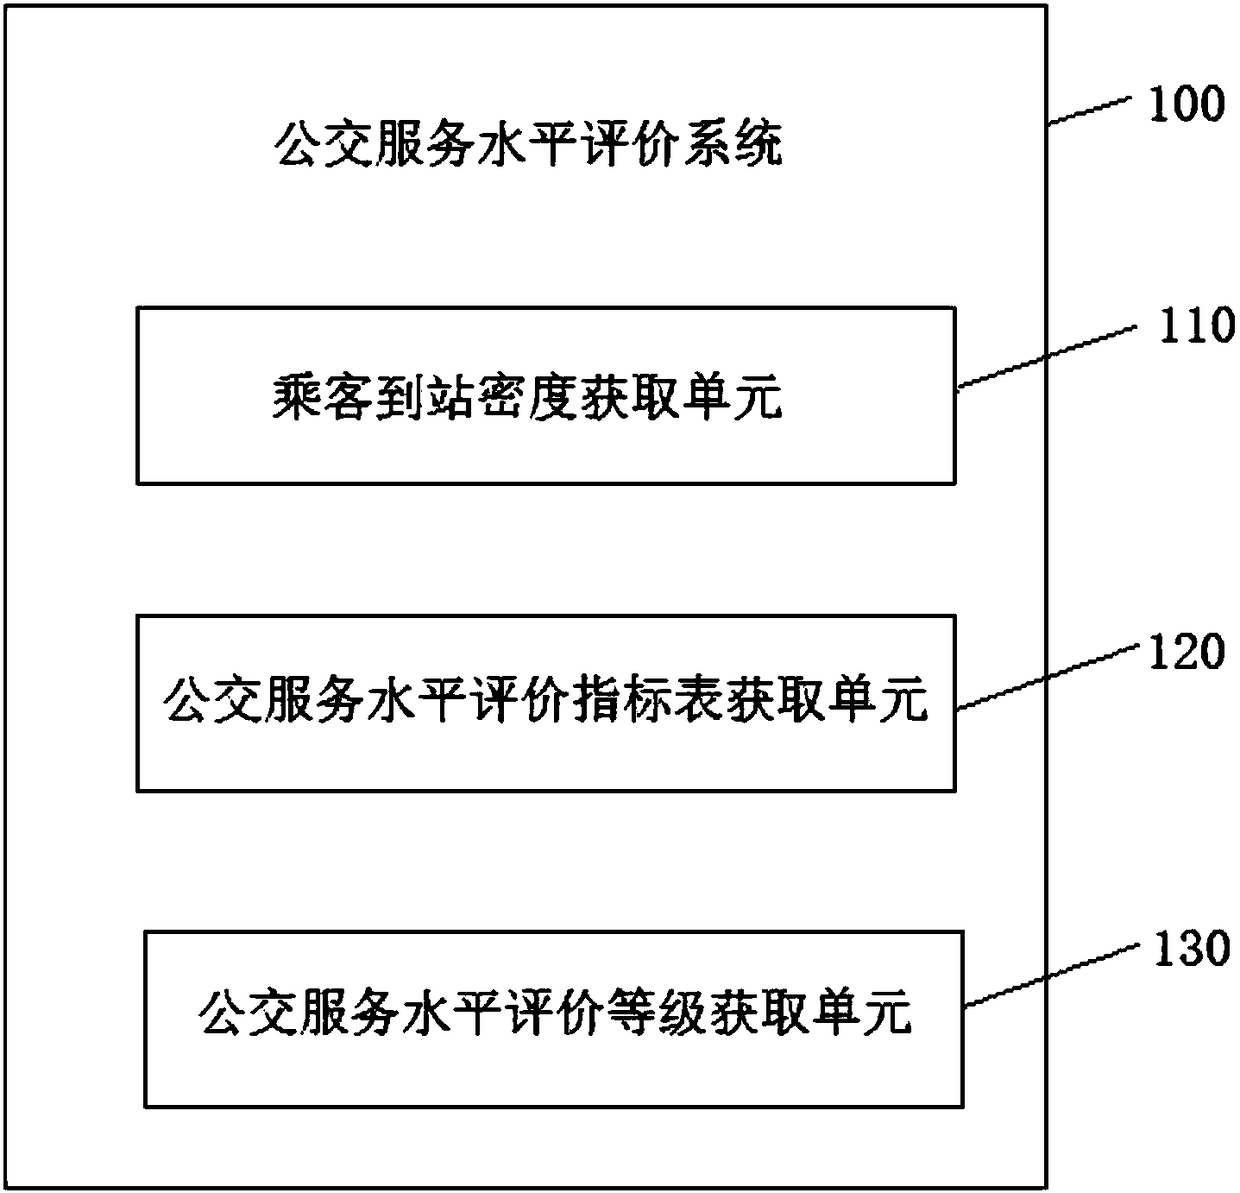 Bus service level evaluation system and method